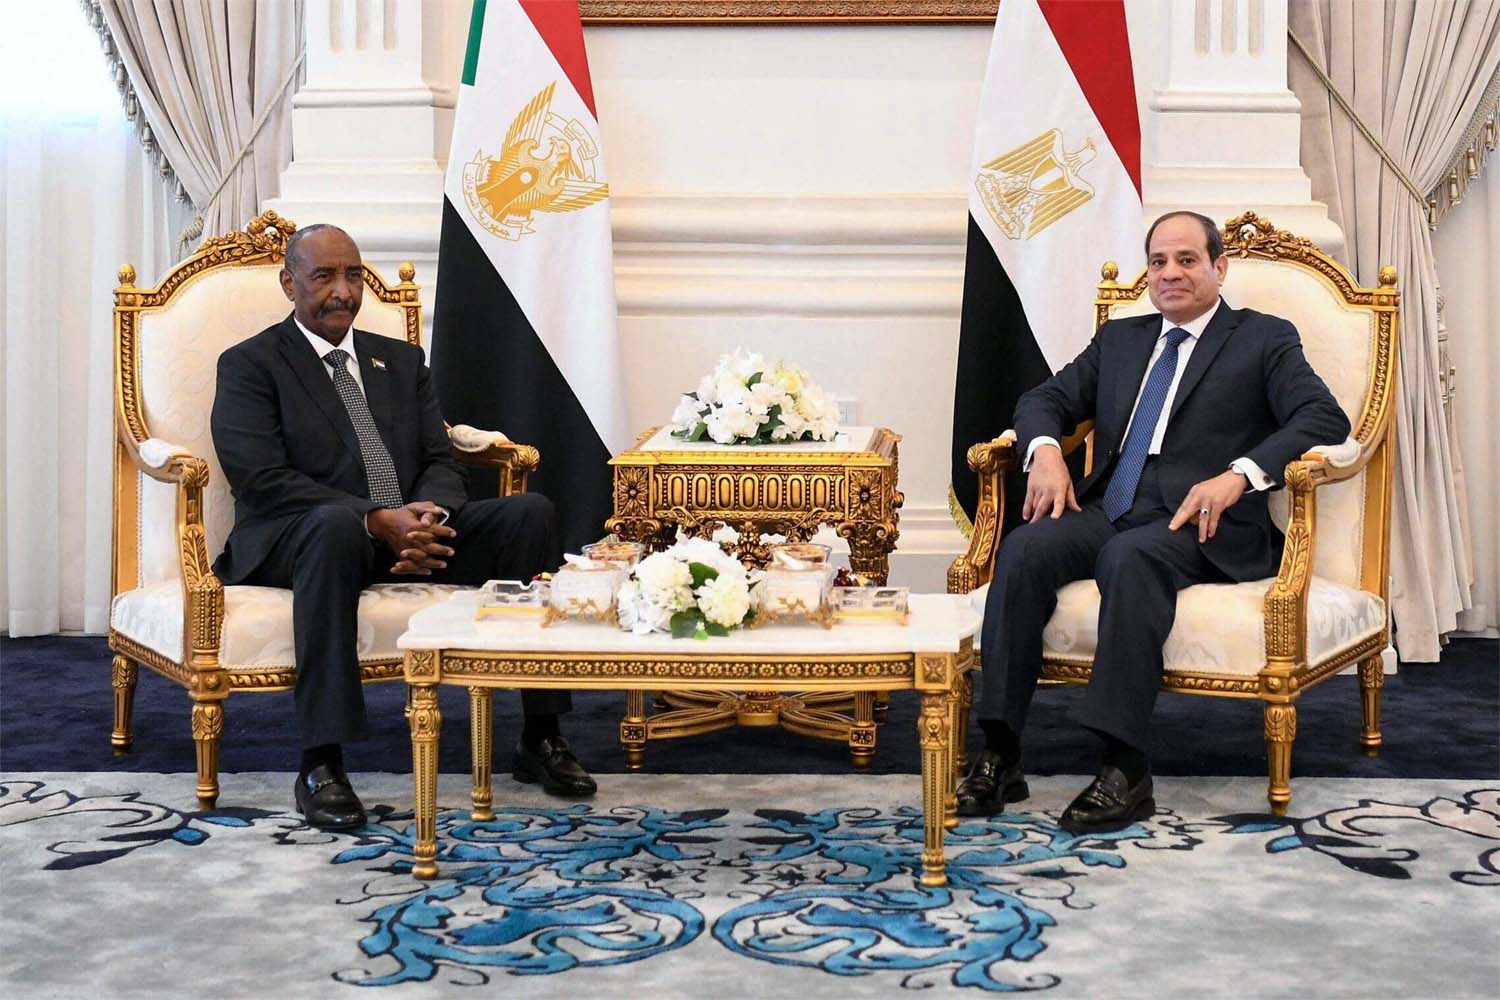 Egypt offered to mediate between Sudan's warring factions